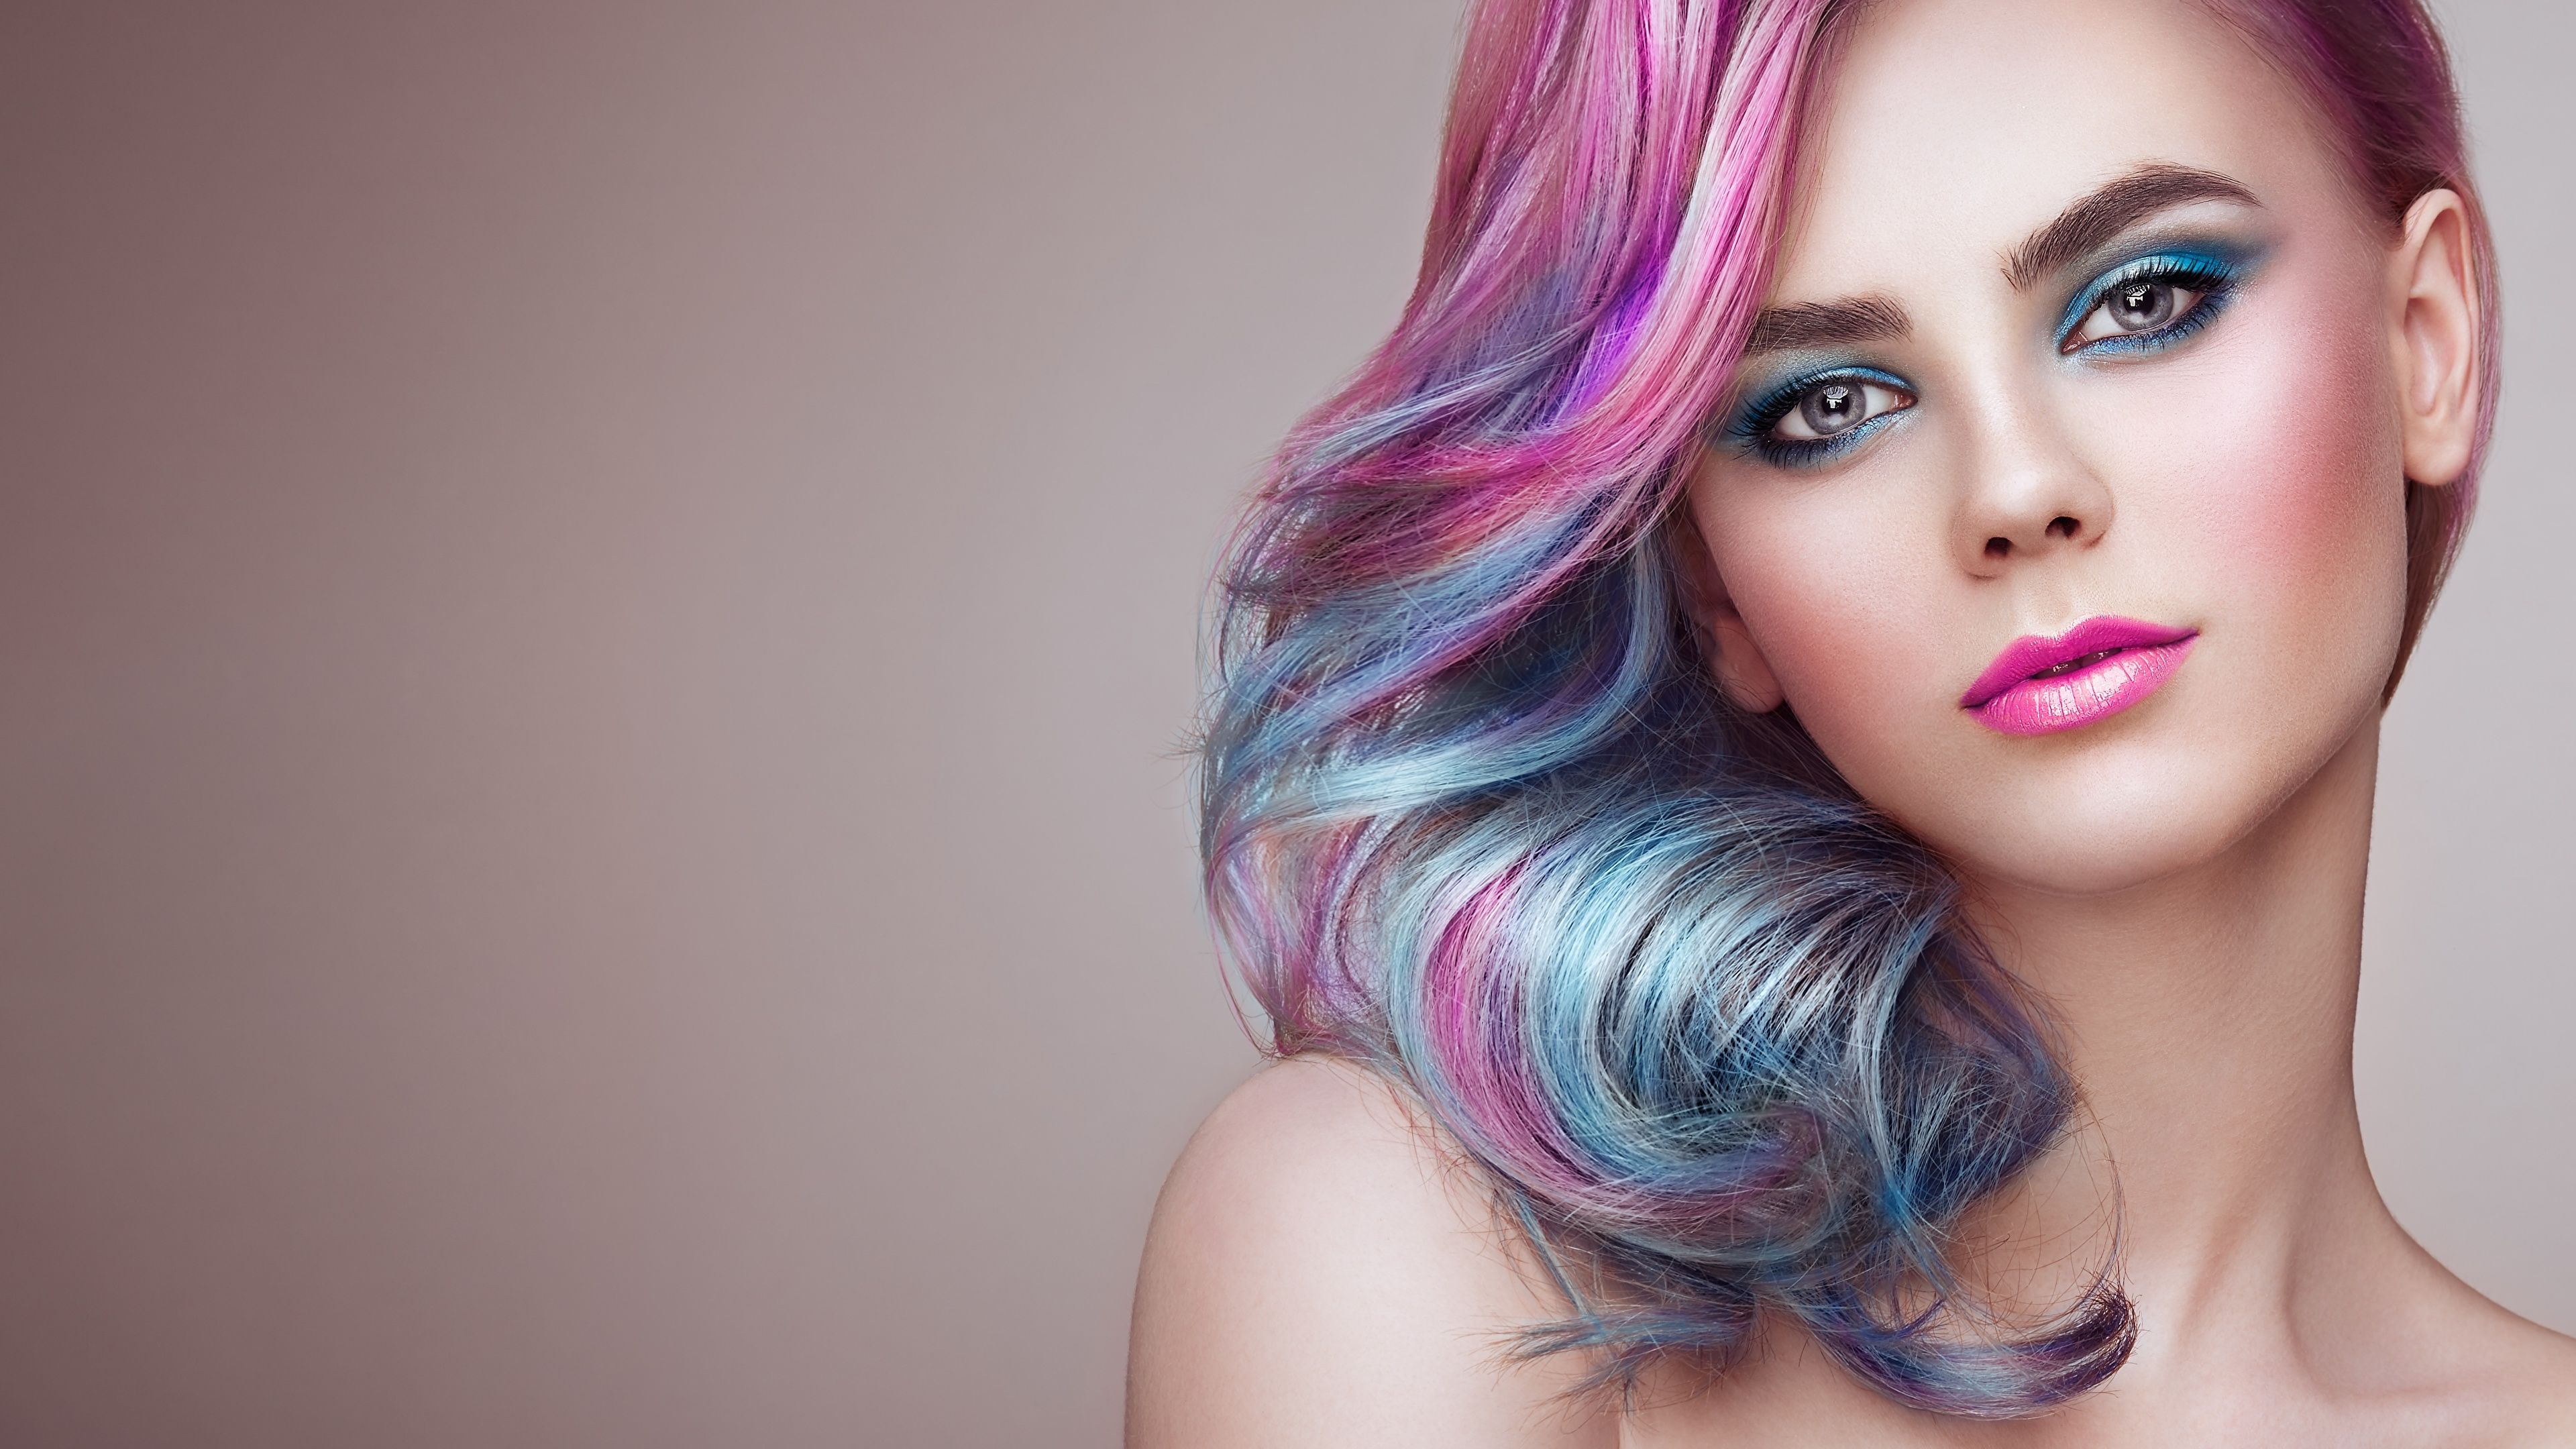 Hairstyle Wallpaper Free Hairstyle Background